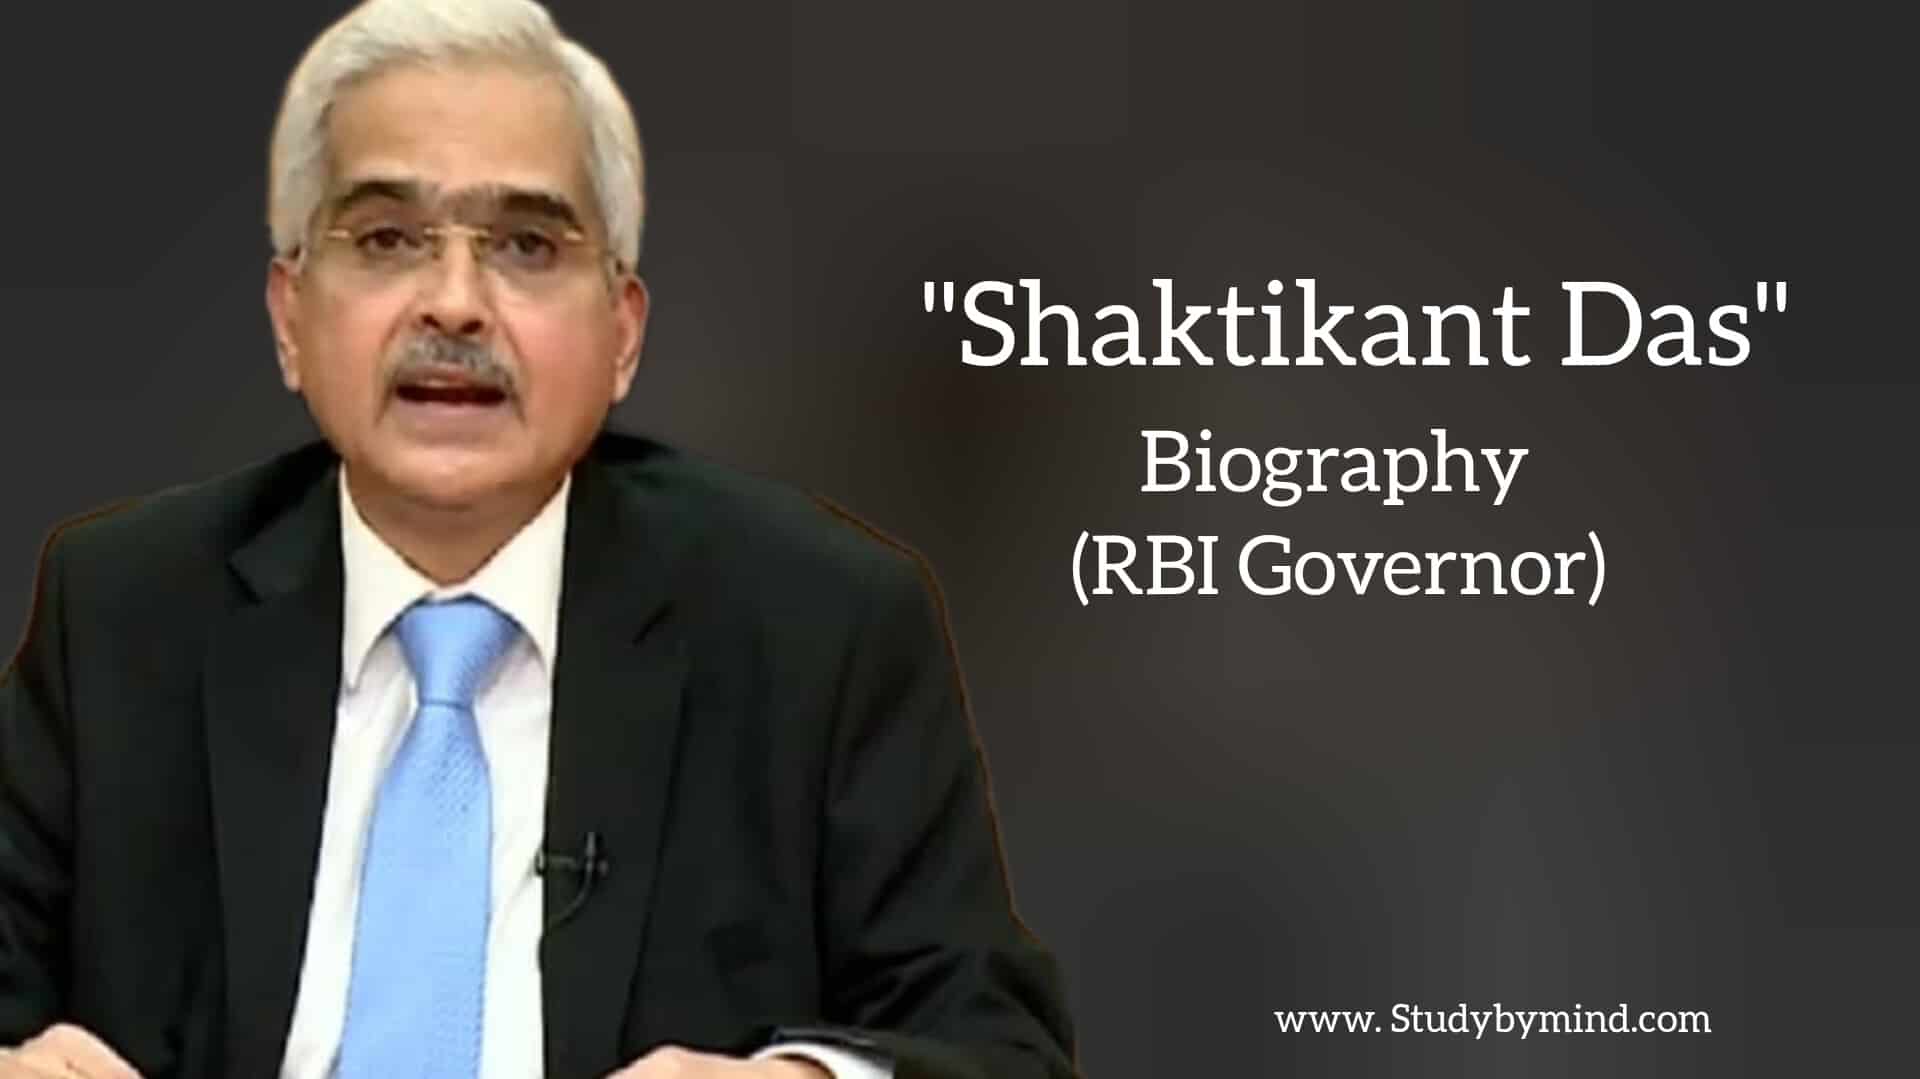 You are currently viewing Shaktikanta das biography in english (Governer Reserve bank of india)